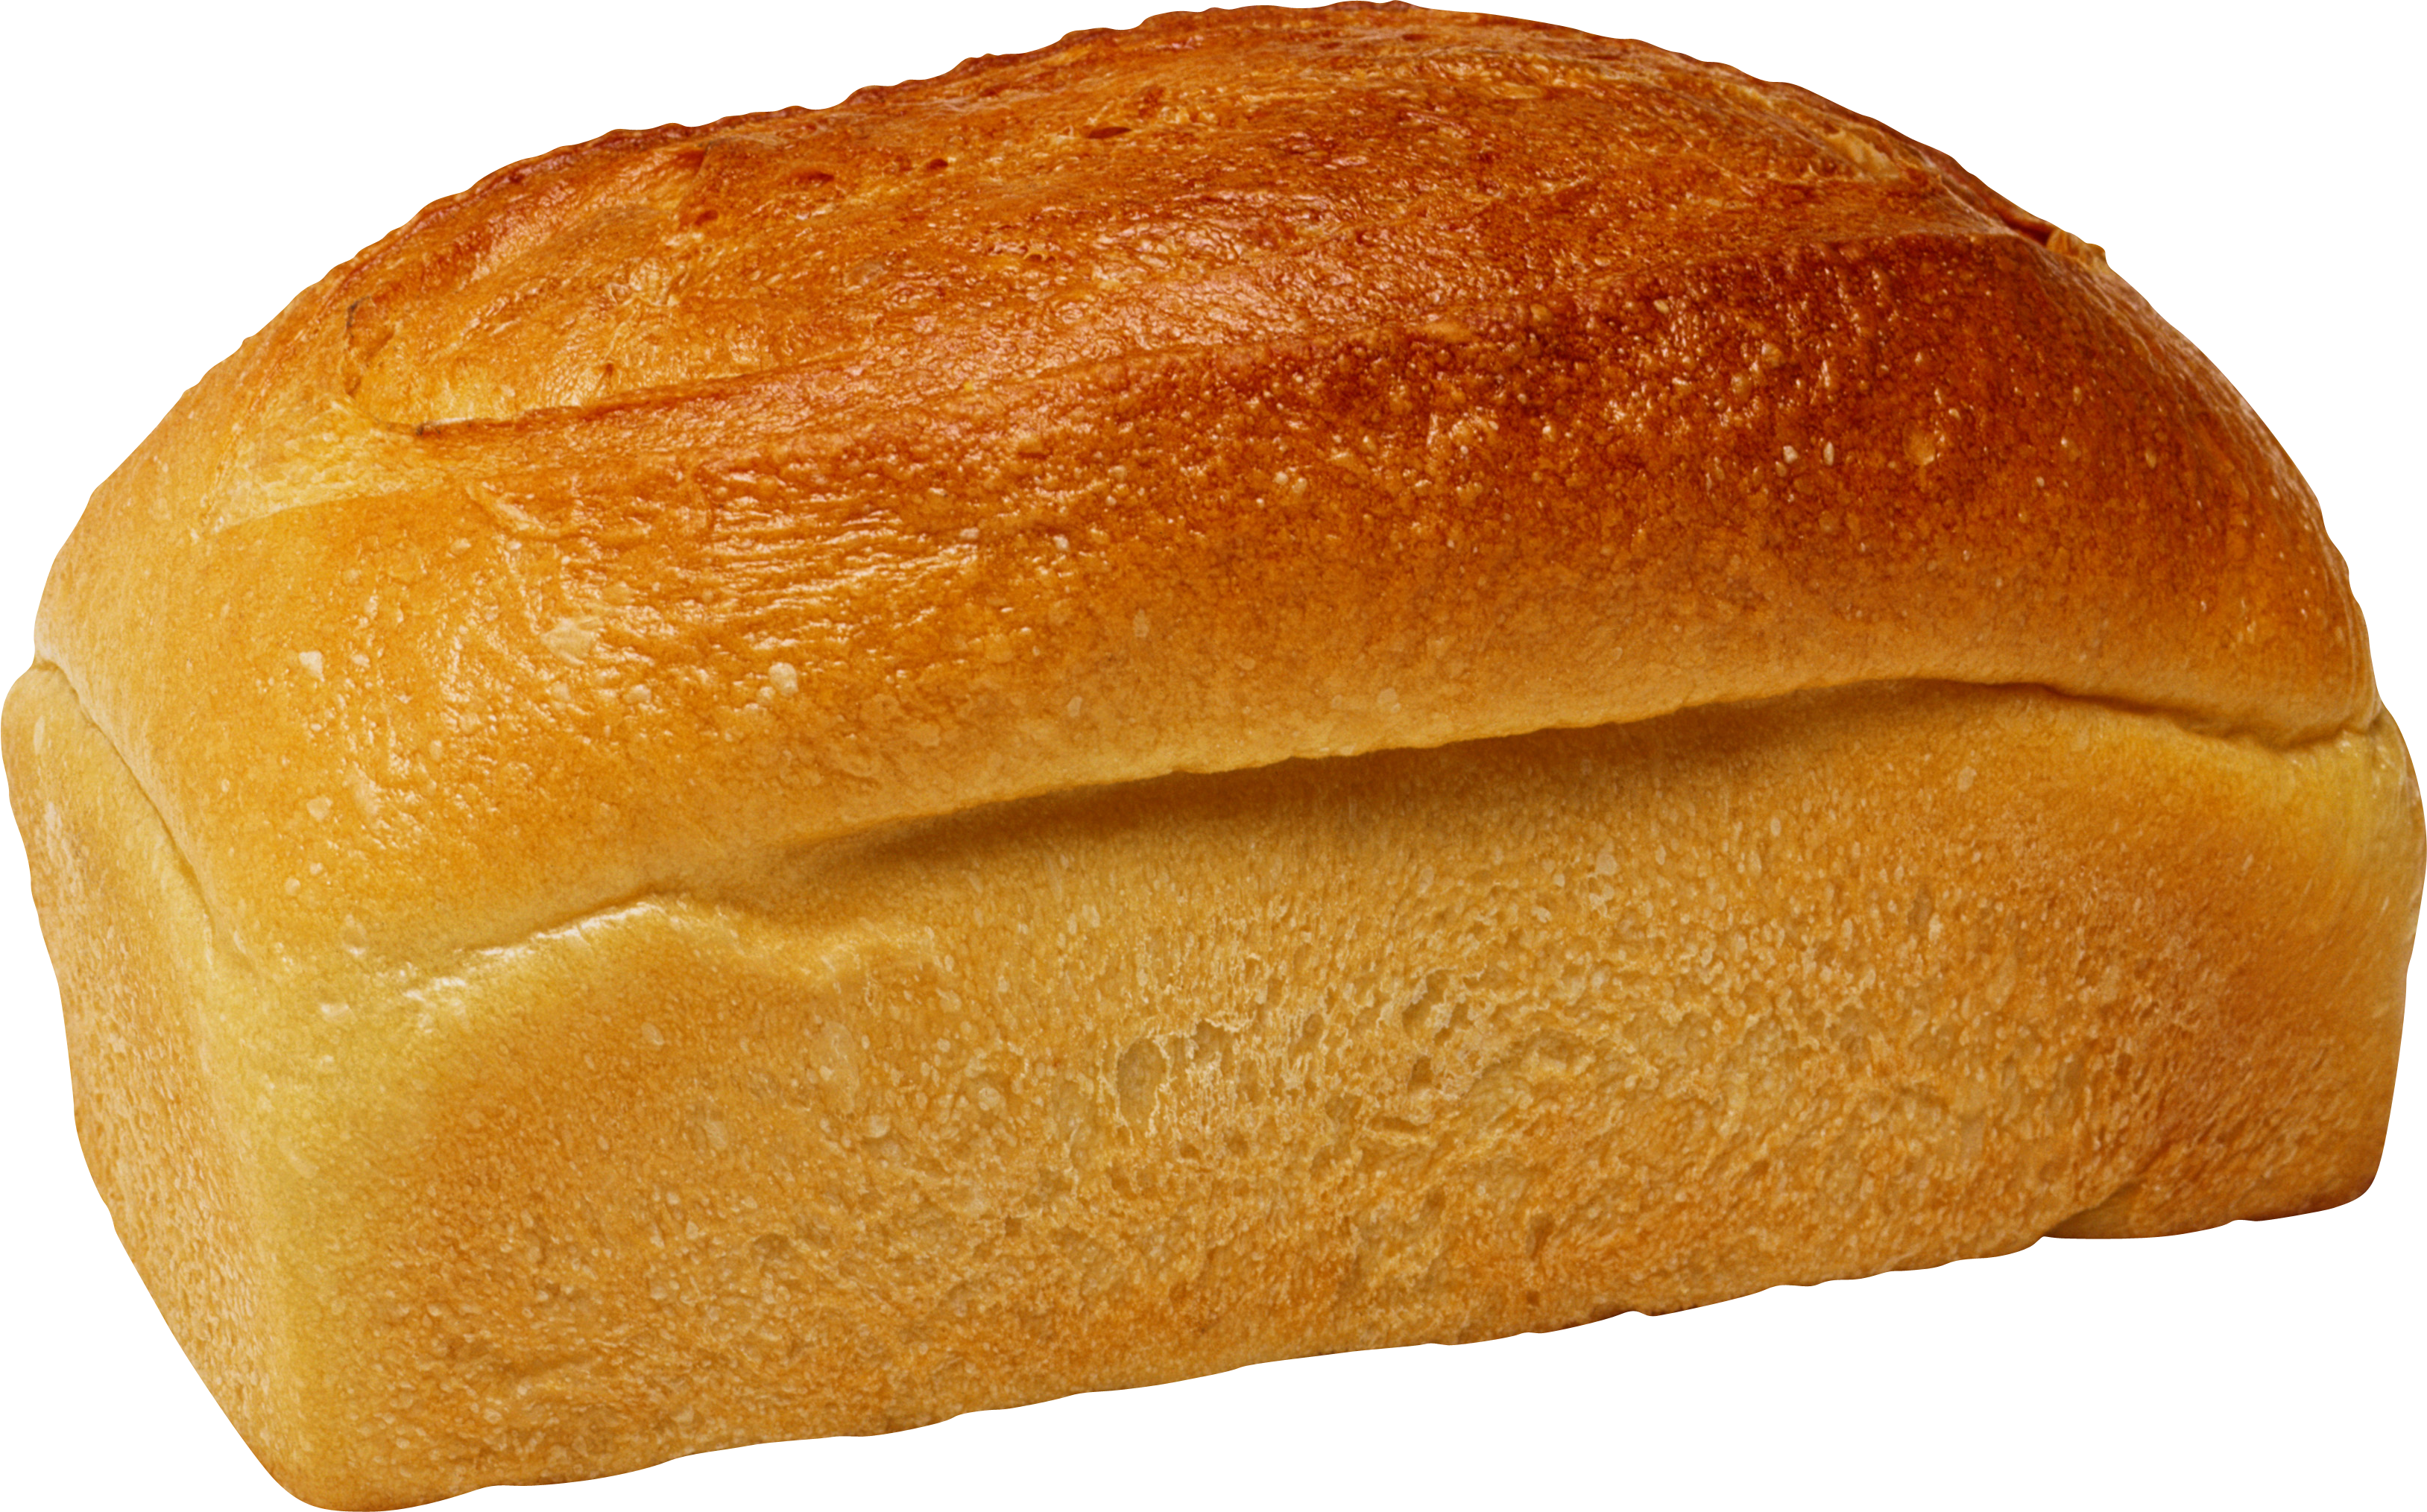 Bread Png Image - Bread Images, Transparent background PNG HD thumbnail